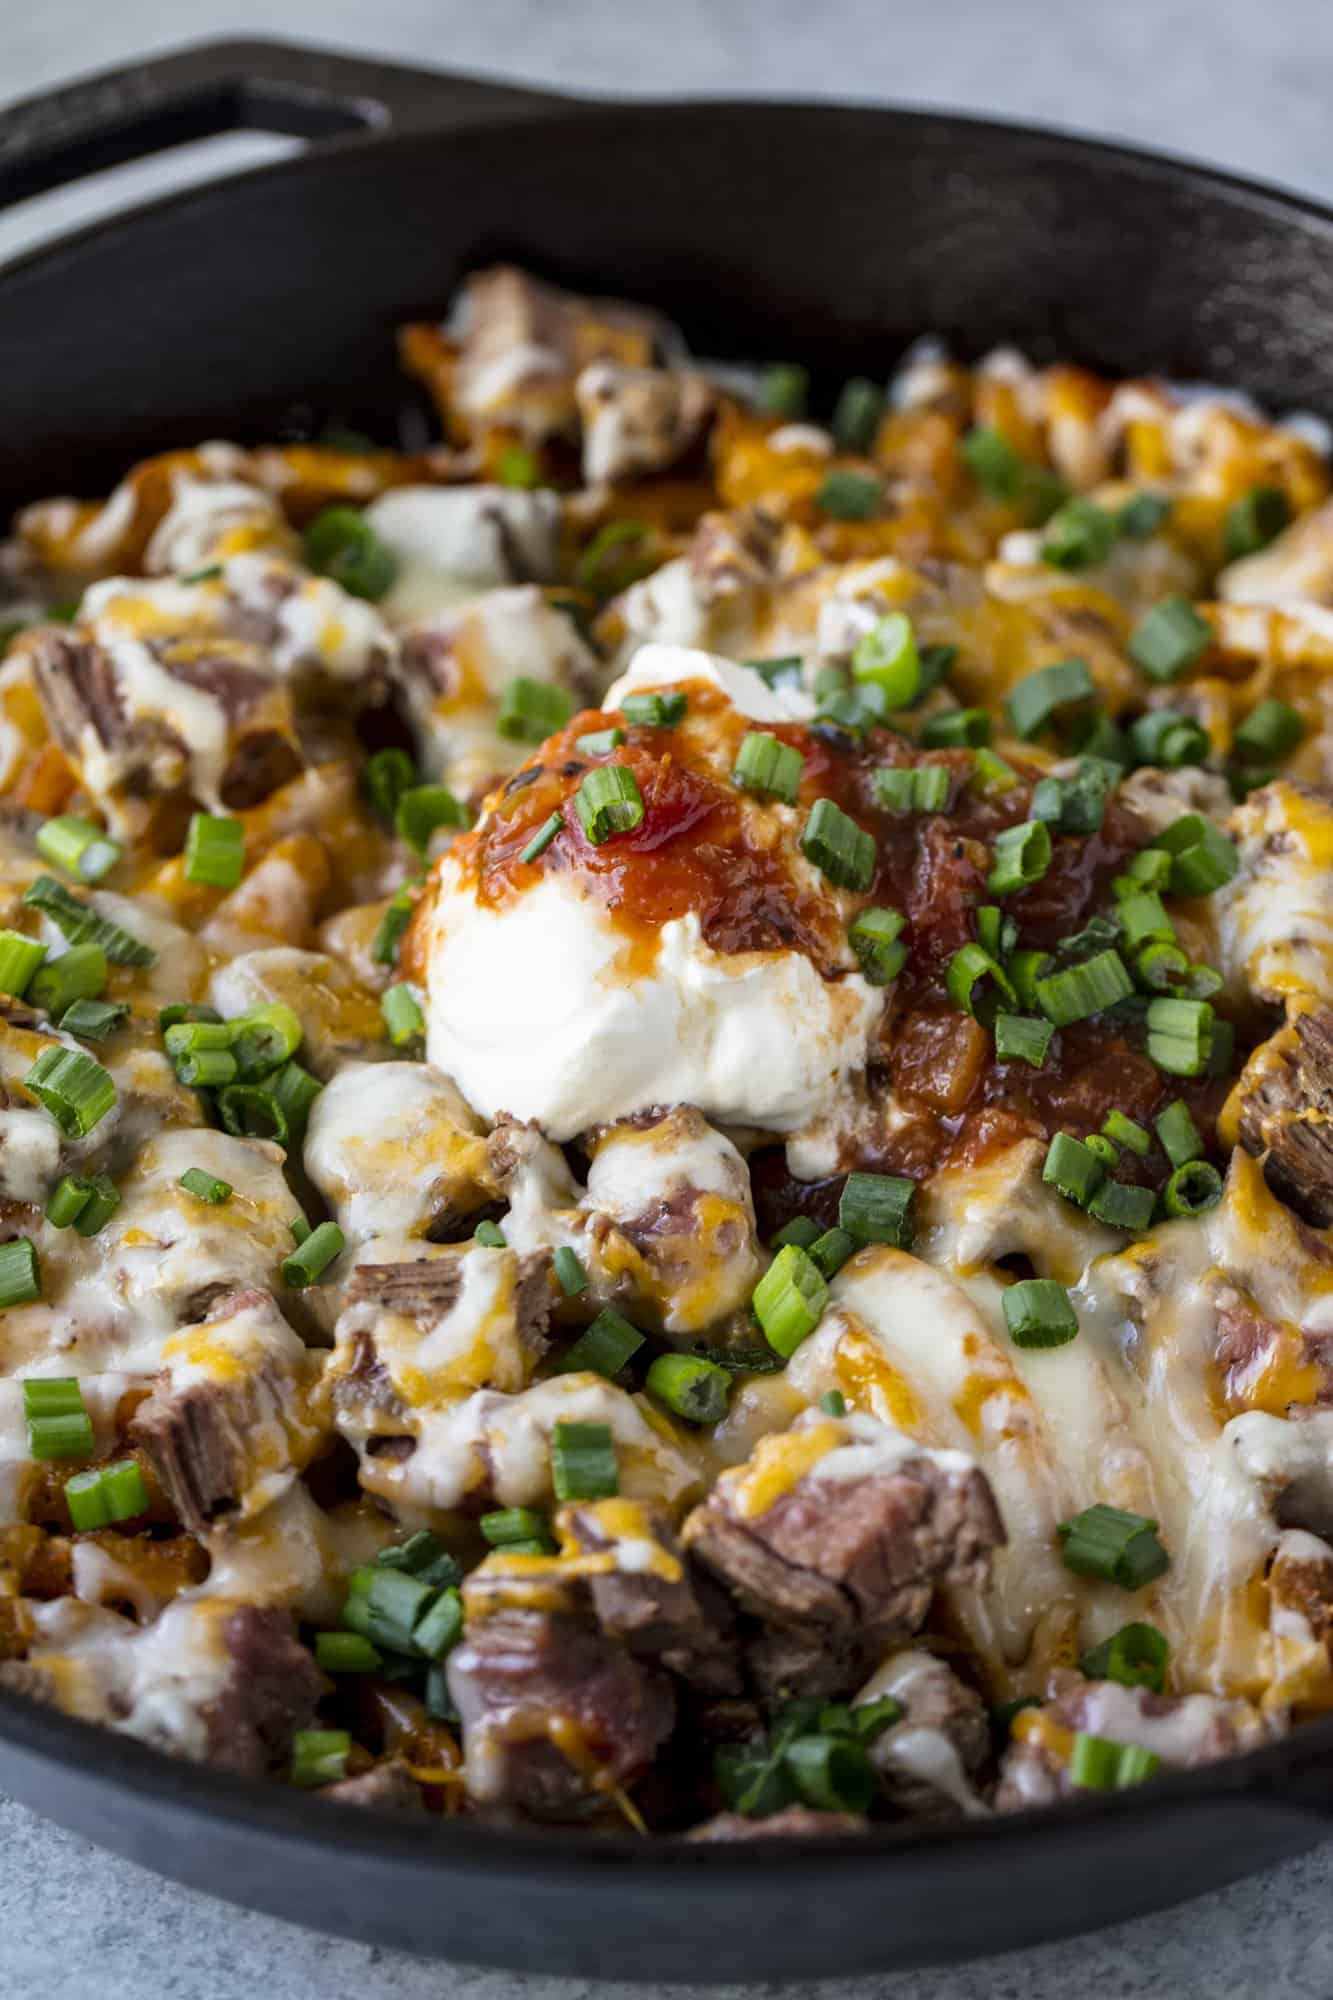 Steak and Potato Nachos combine three of your favorite comfort foods into one amazing and indulgent skillet dish. Eat it as a drool-worthy appetizer, or as a hearty and full dinner.